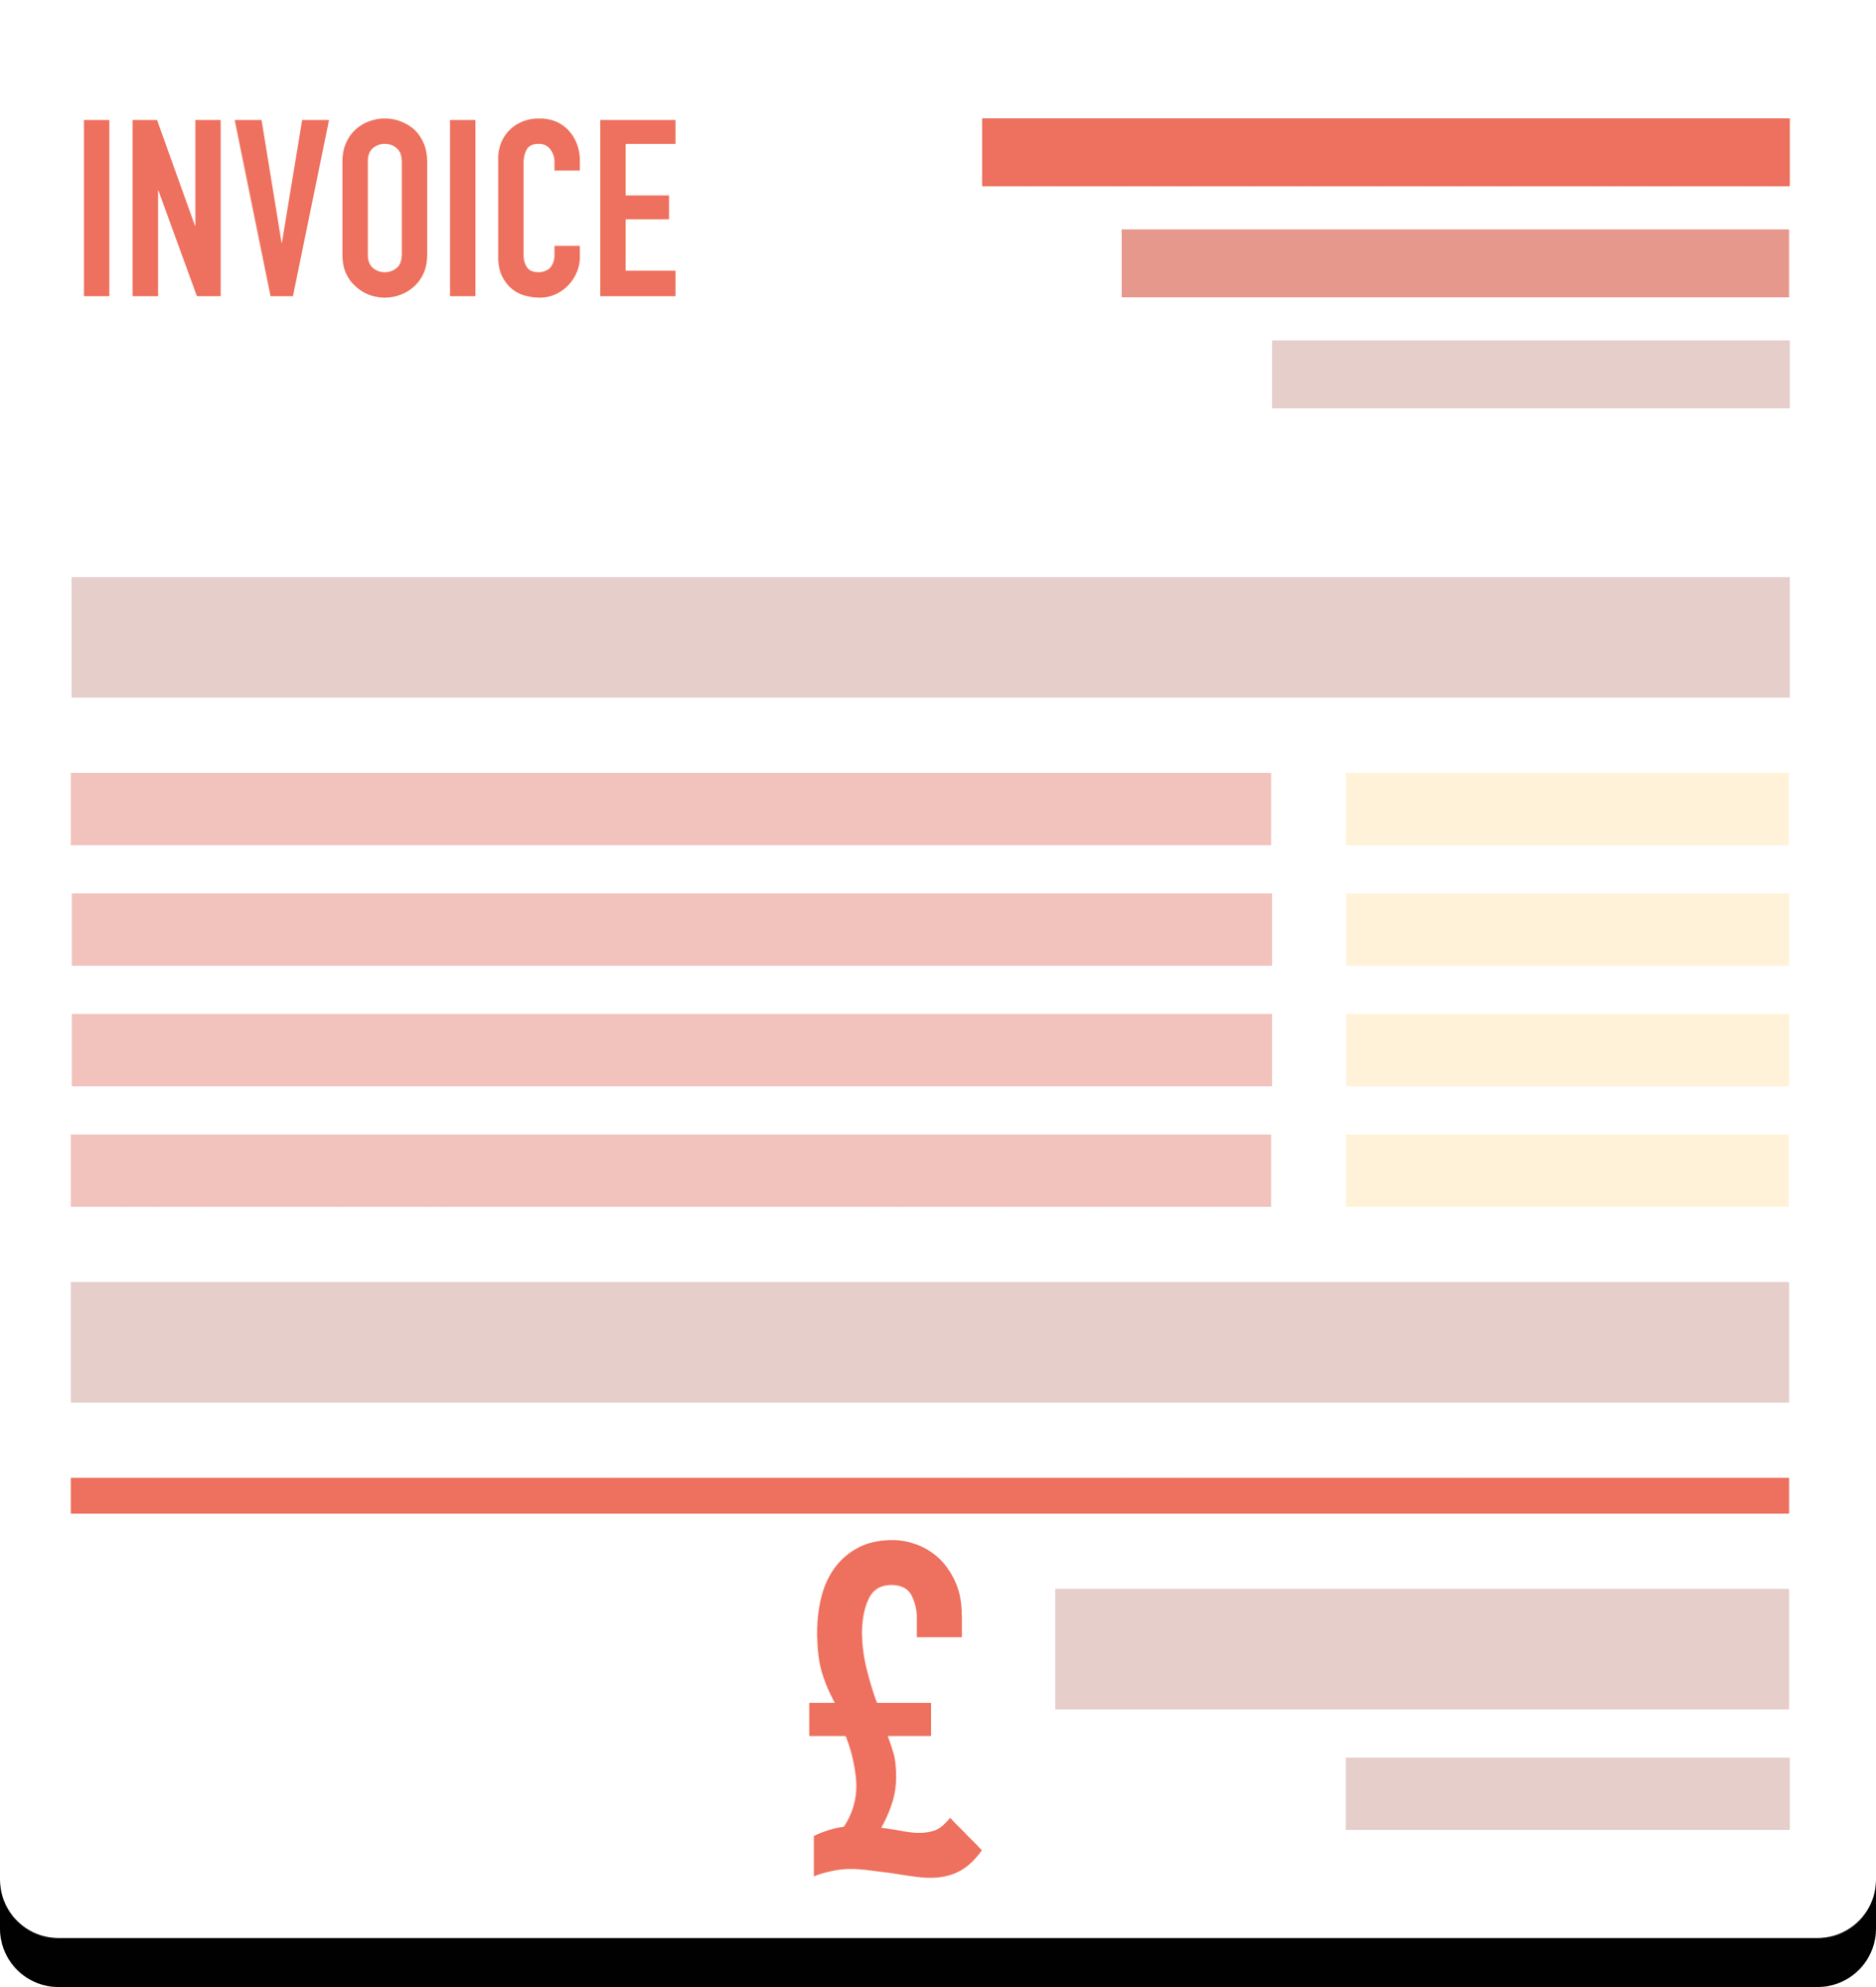 Invoice template for building contractors